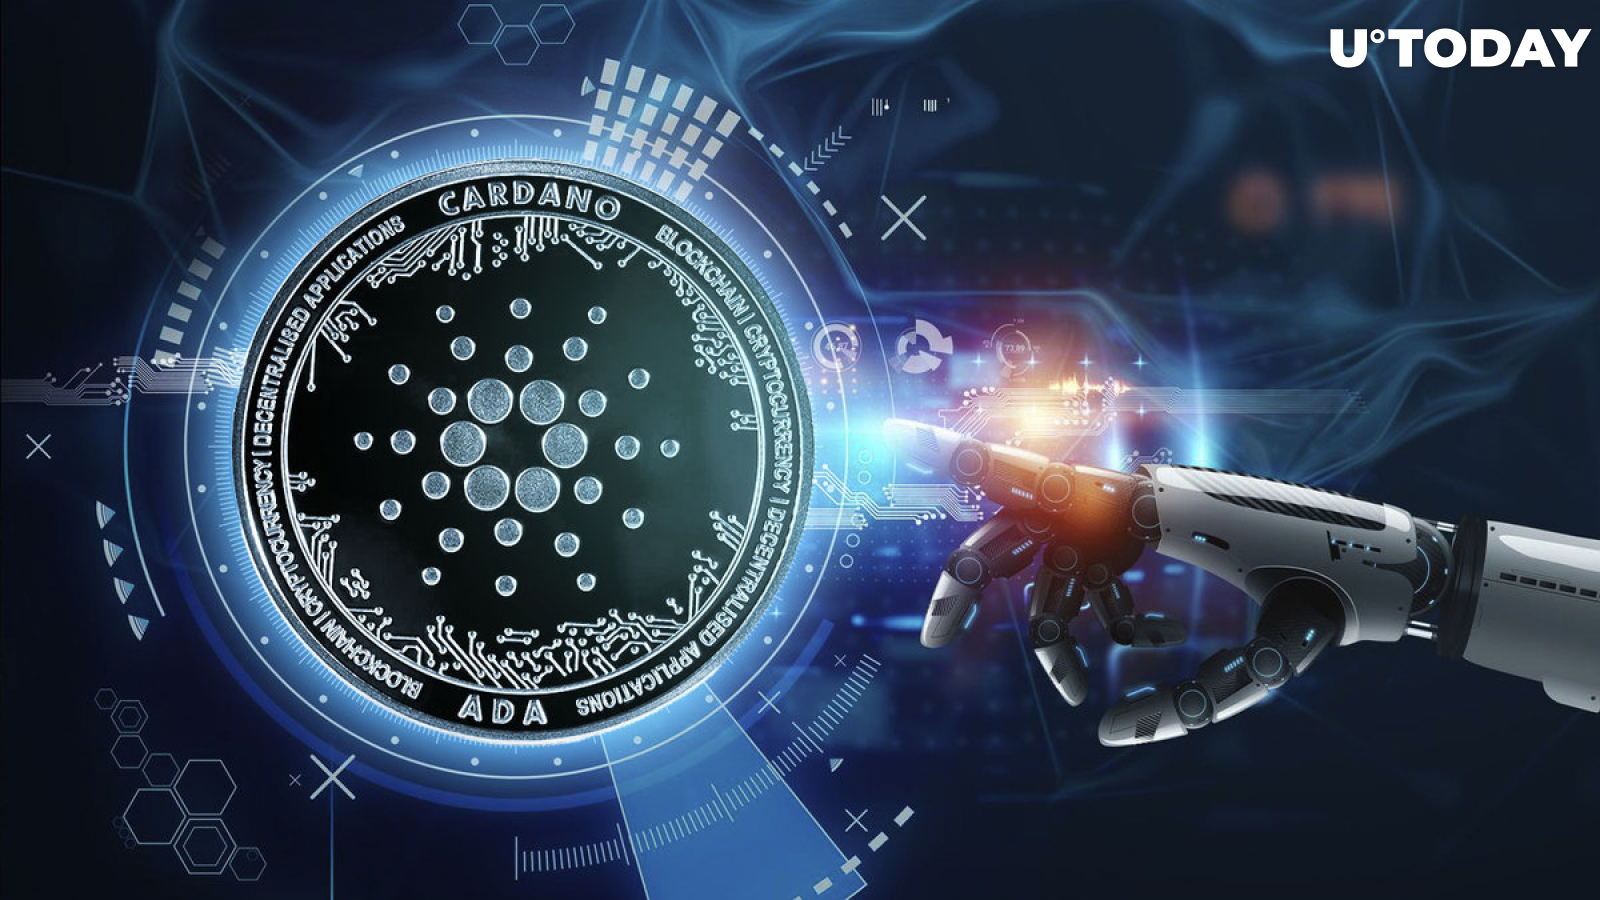 Cardano Makes AI Progress With First Internet-Generative Chatbot